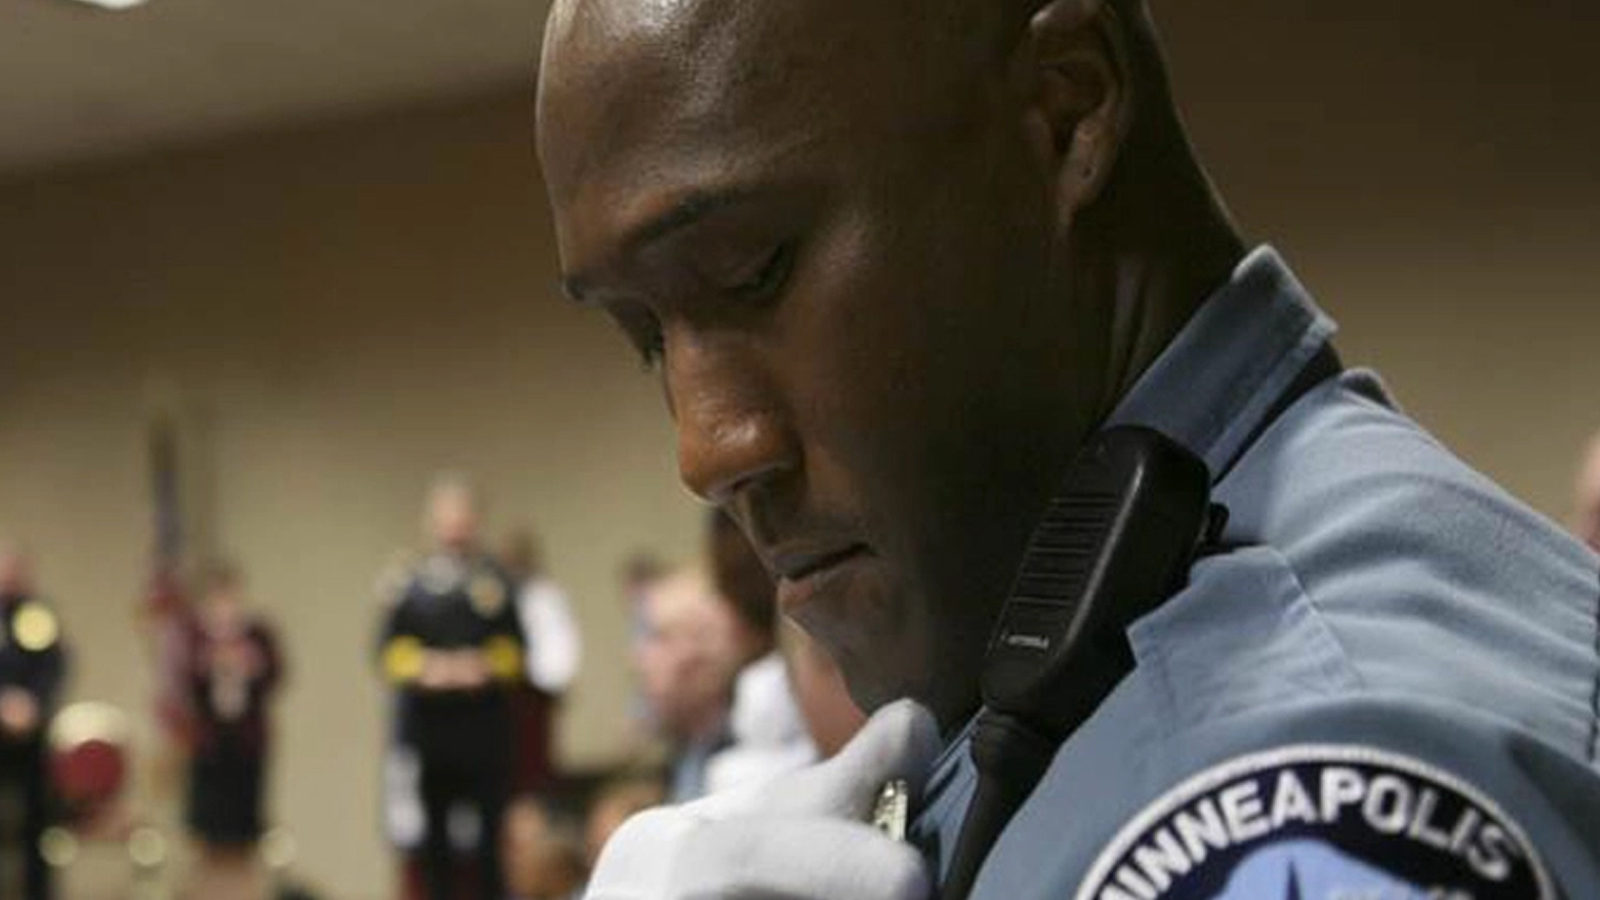 Minneapolis Police Officer Pleads Not Guilty To 9 Criminal Counts, Released On Bond